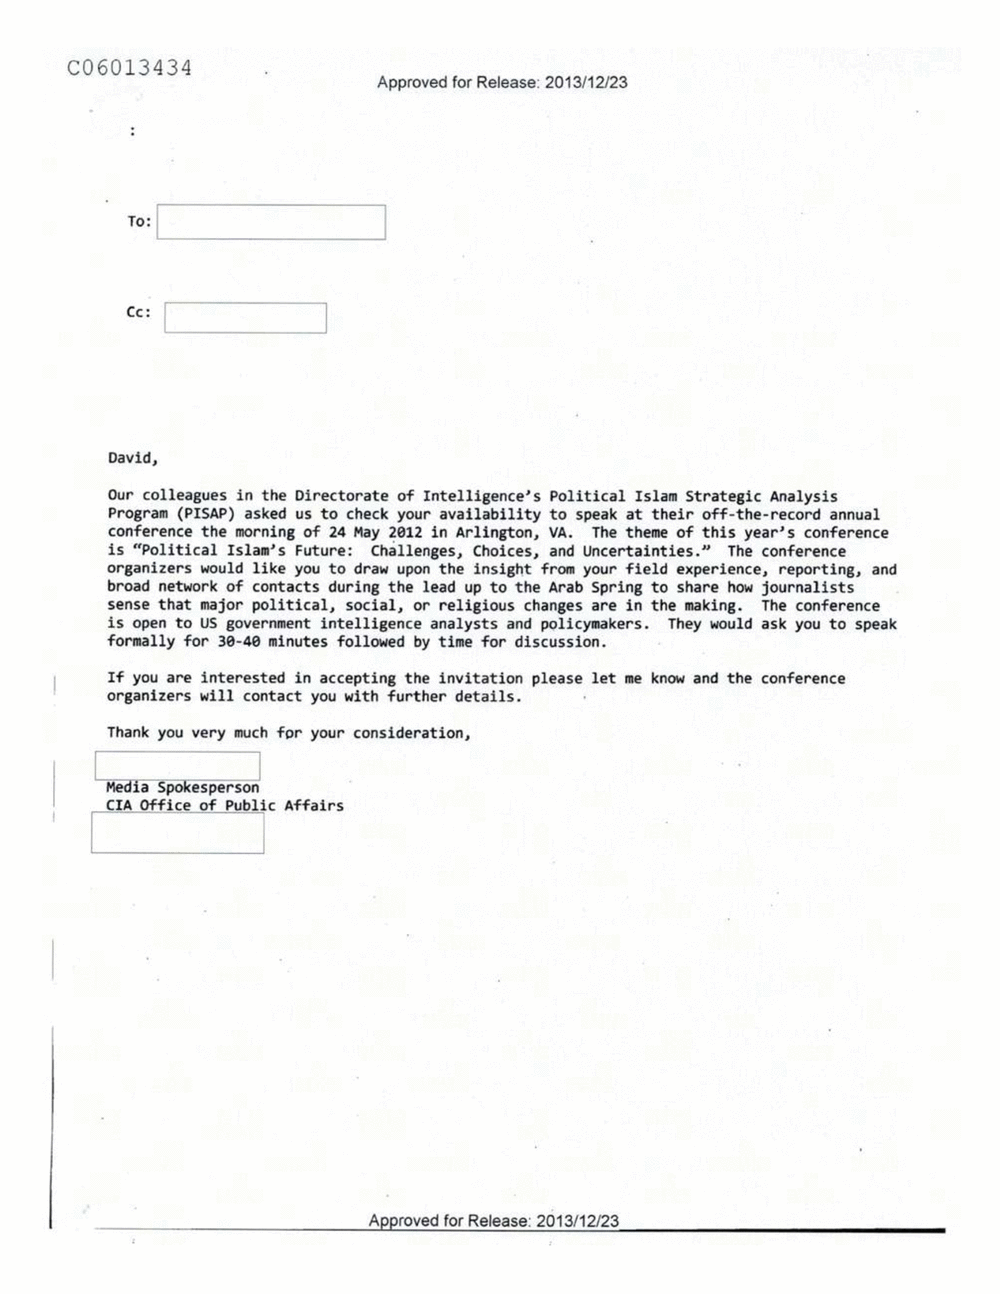 Page 296 from Email Correspondence Between Reporters and CIA Flacks